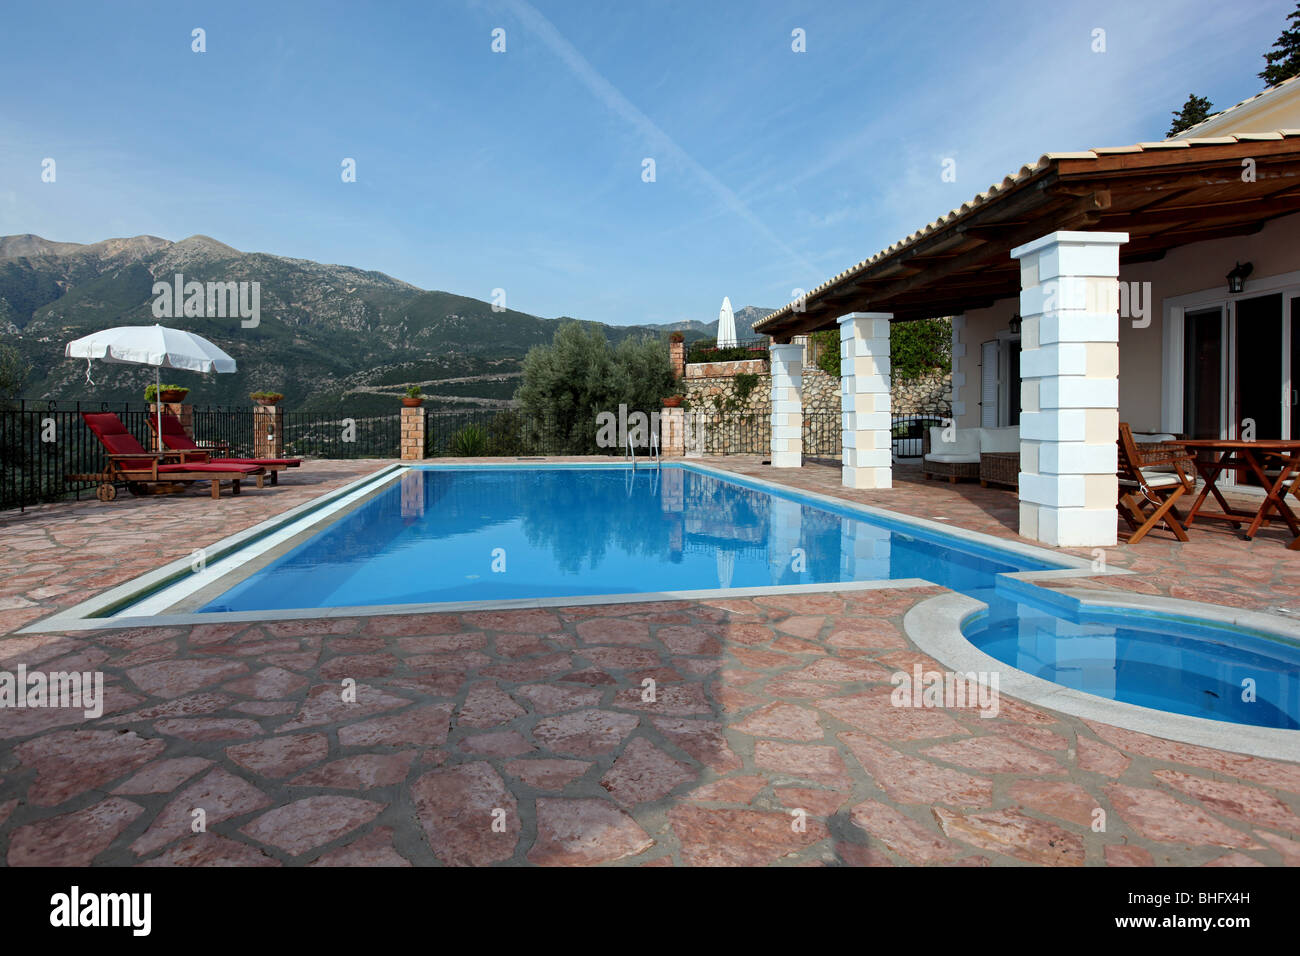 Luxury holiday vacation villa with a large private swimming pool. Image taken in the Greek Islands. Stock Photo